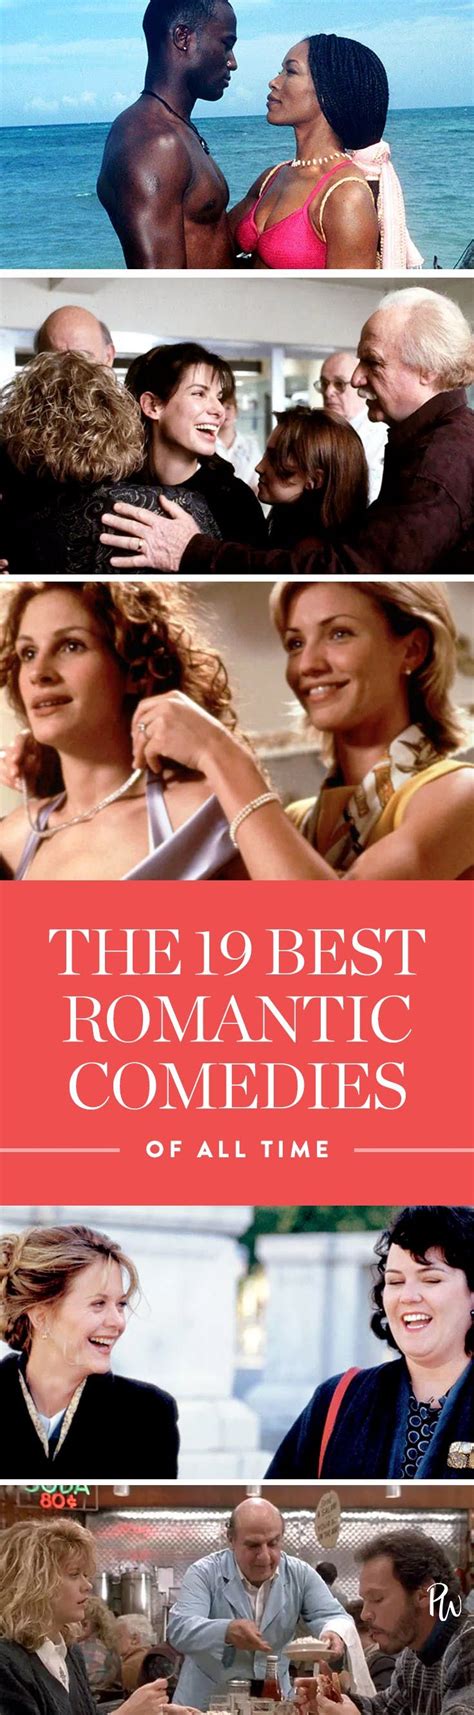 Top 10 best romantic comedies movies/anime series of all time/the decade 2000s from hollywood/bollywood/hindi and full best romantic there are many excellent romantic comedy movies from both hollywood and bollywood for valentine's day. The 19 Best Romantic Comedies of All Time | Best romantic ...